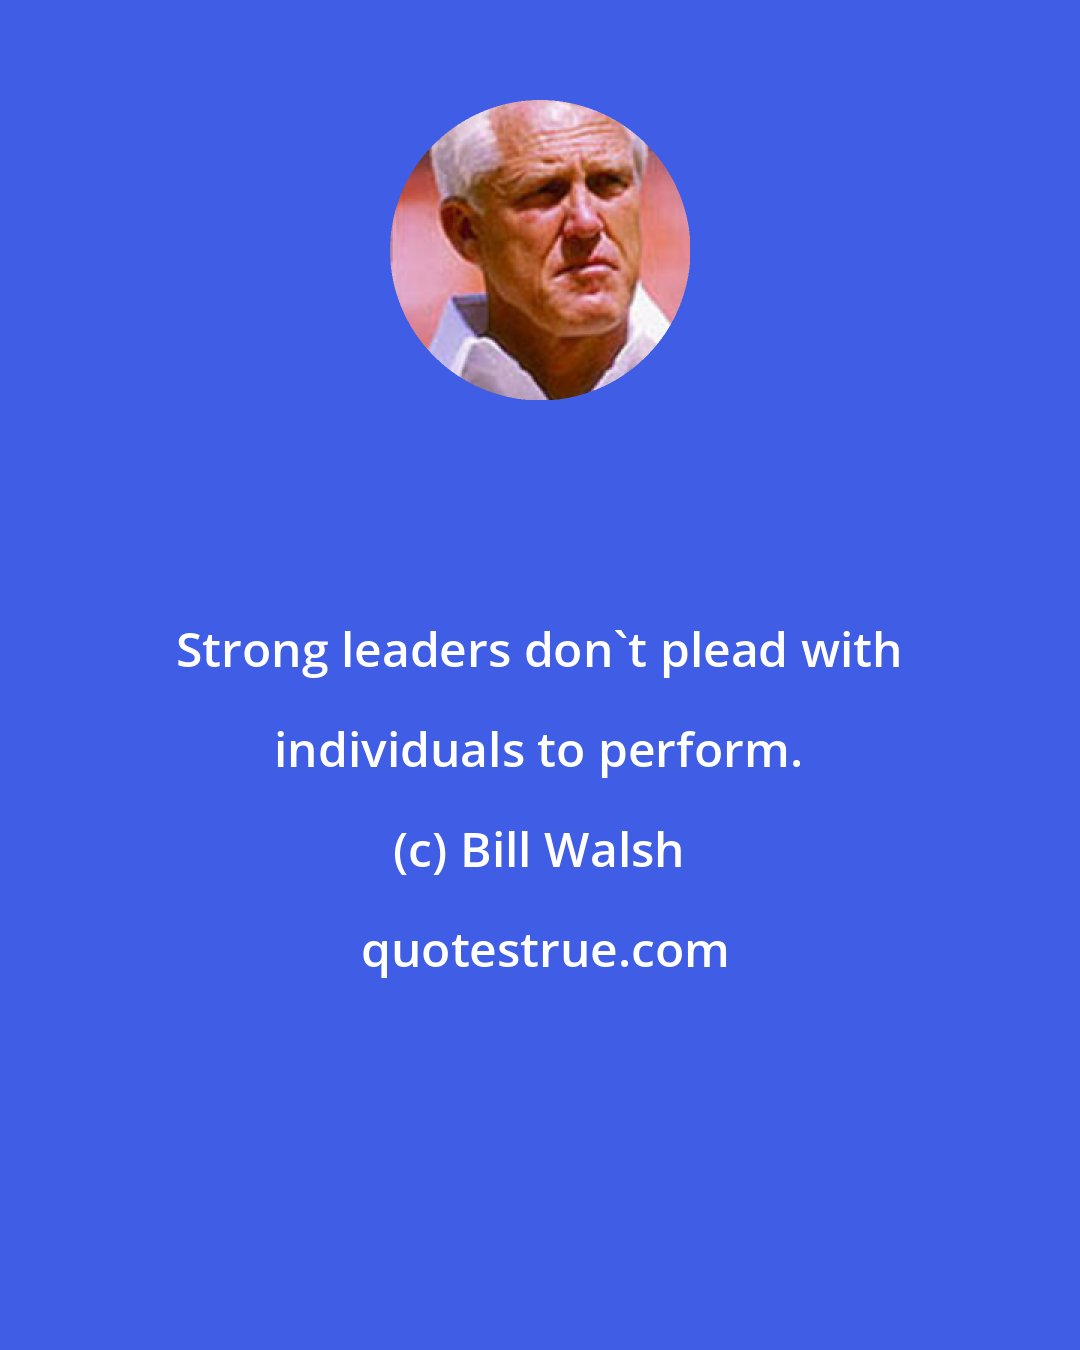 Bill Walsh: Strong leaders don't plead with individuals to perform.